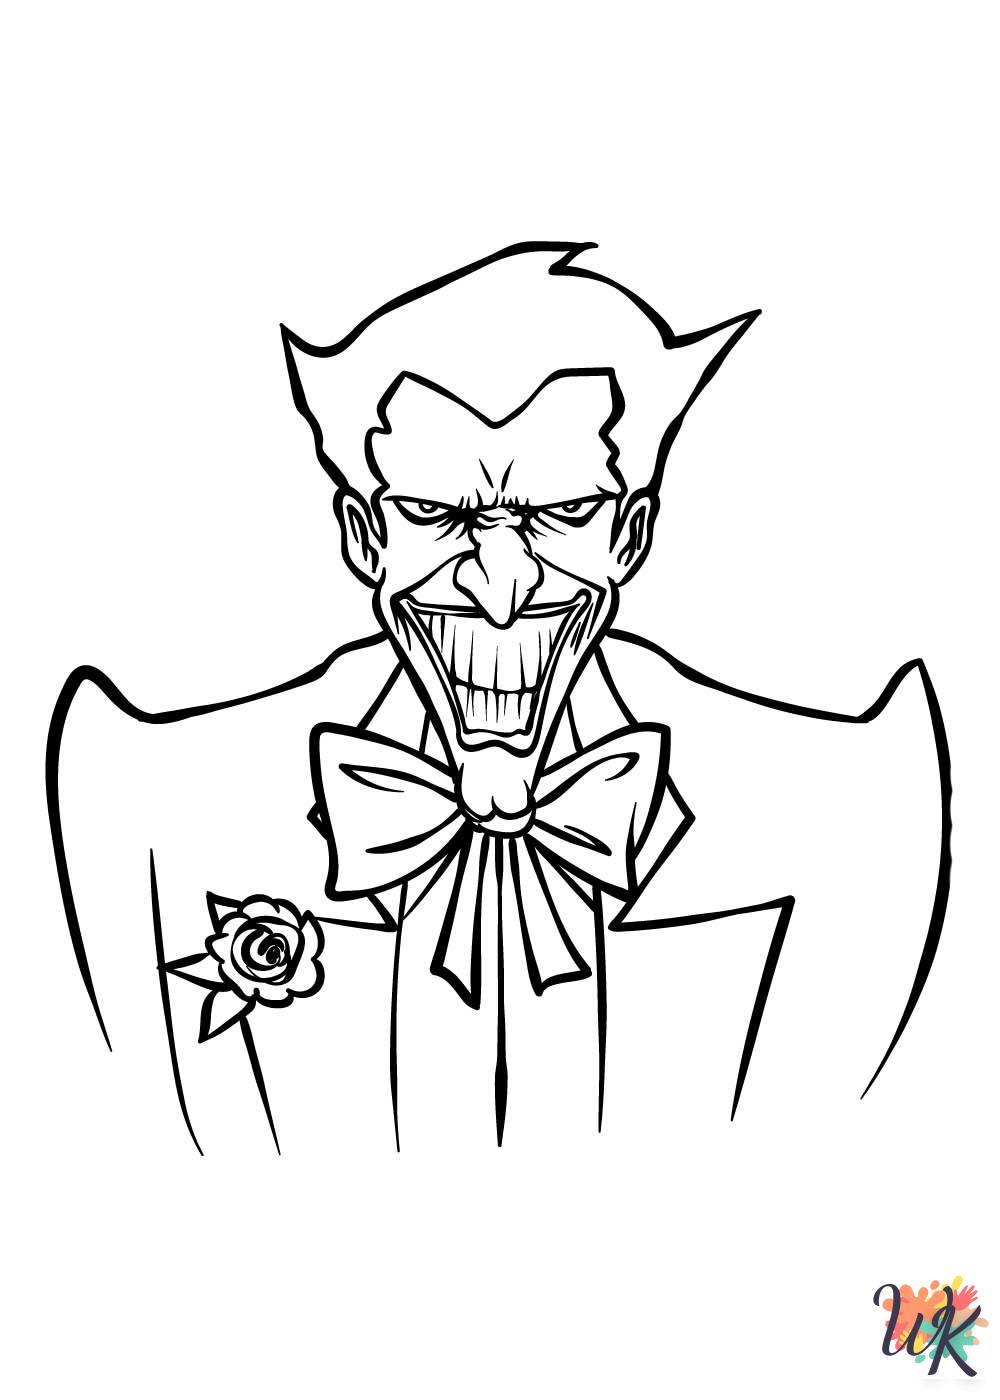 Joker coloring pages free